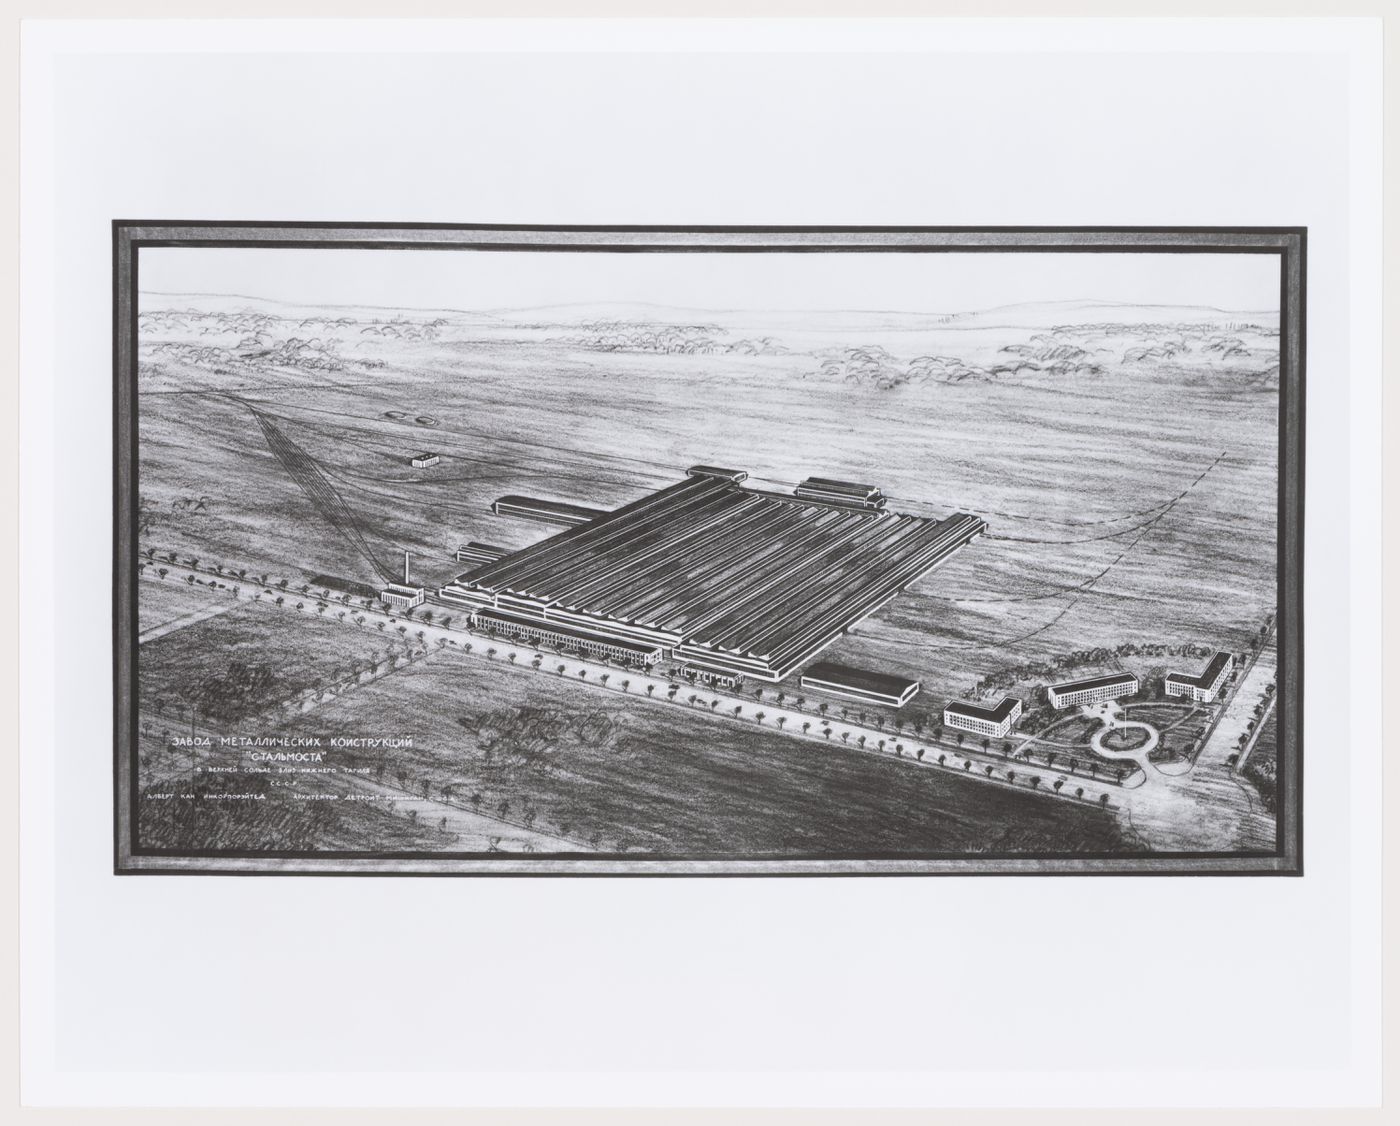 Photograph of a bird's-eye perspective drawing for or of the Steel Fabricating Plant, Nizhniĭ Tagil, Soviet Union (now in Russia)